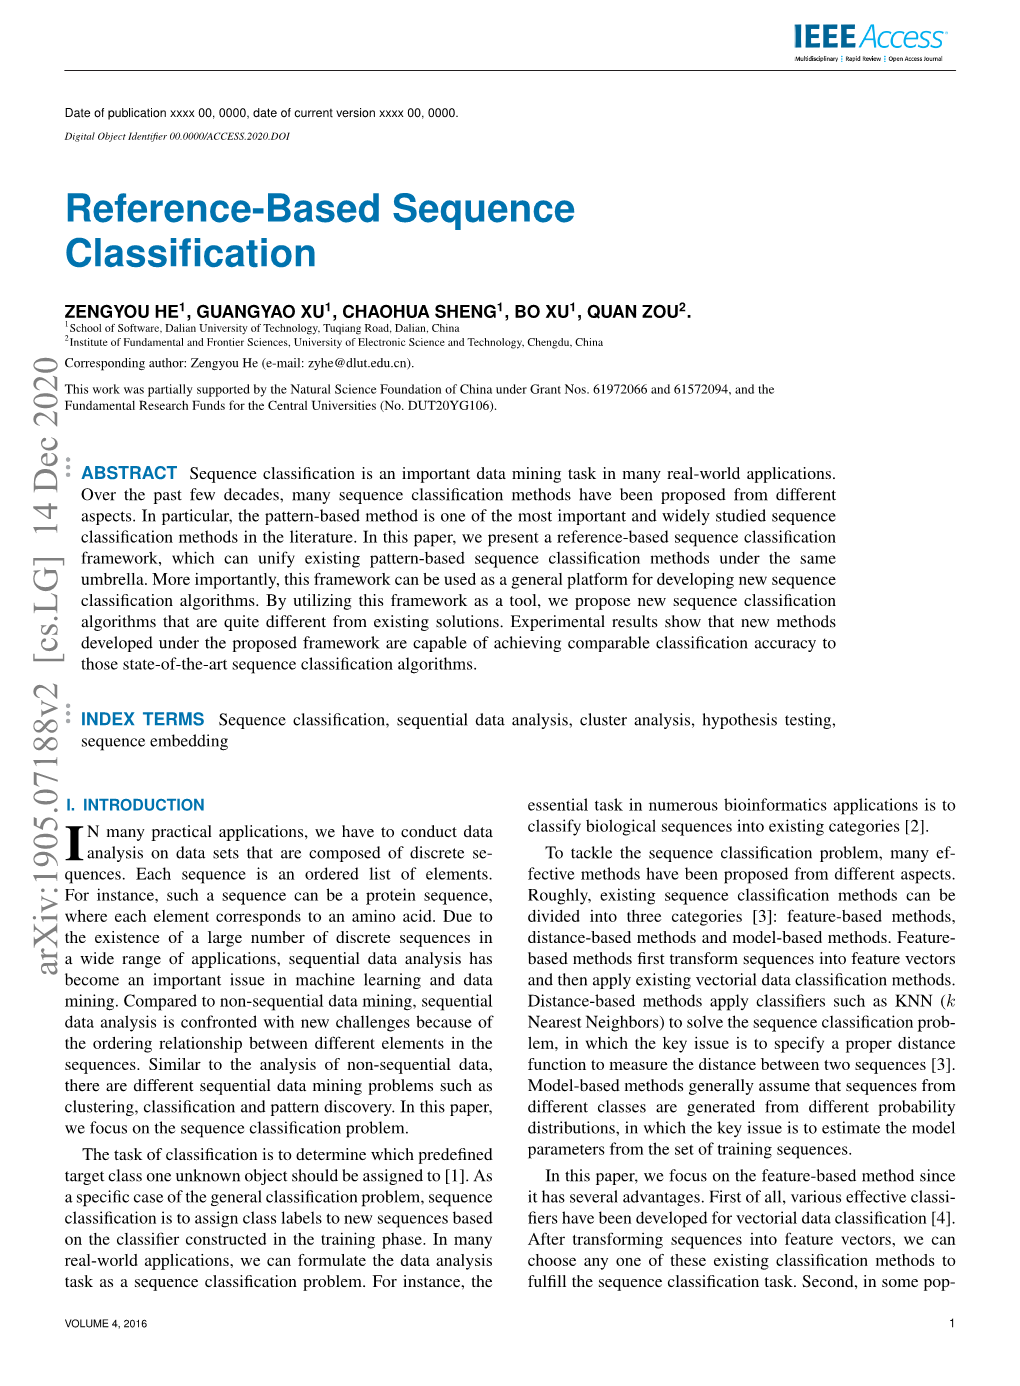 Reference-Based Sequence Classification